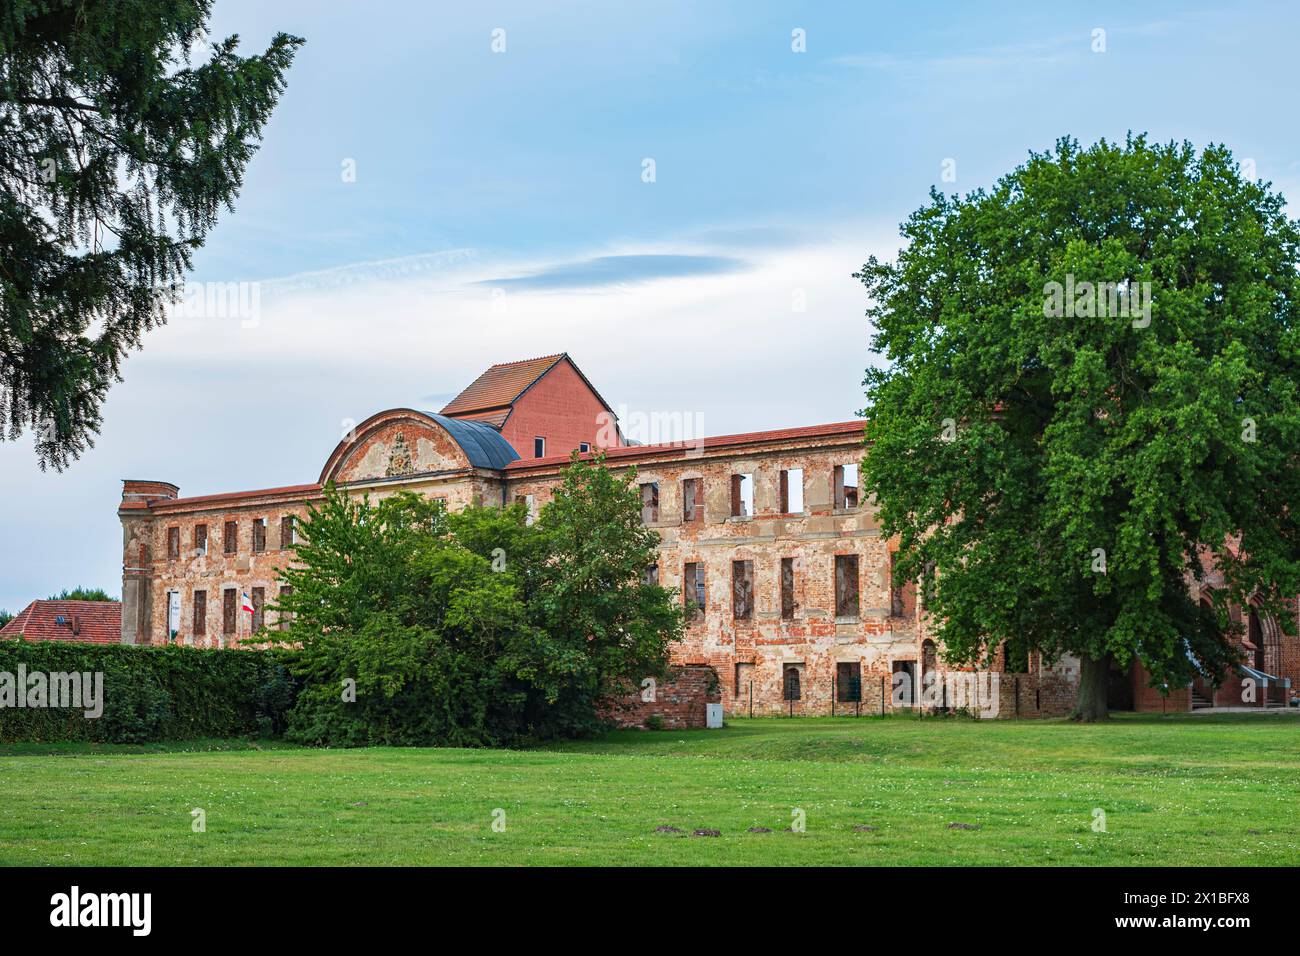 Dargun Palace and Abbey, dating back to the late 17th century in its present form, Mecklenburg-Western Pomerania, Germany. Stock Photo